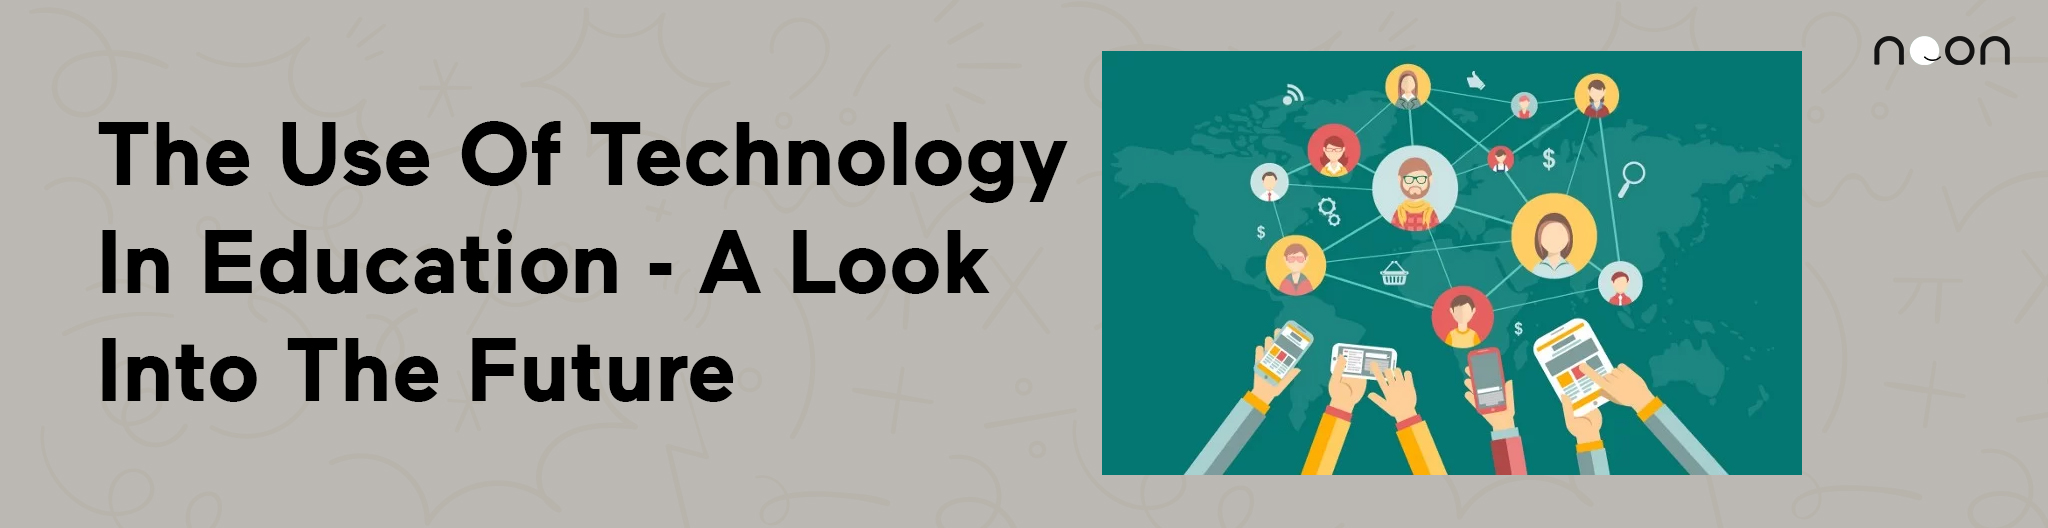 The Use Of Technology In Education - A Look Into The Future